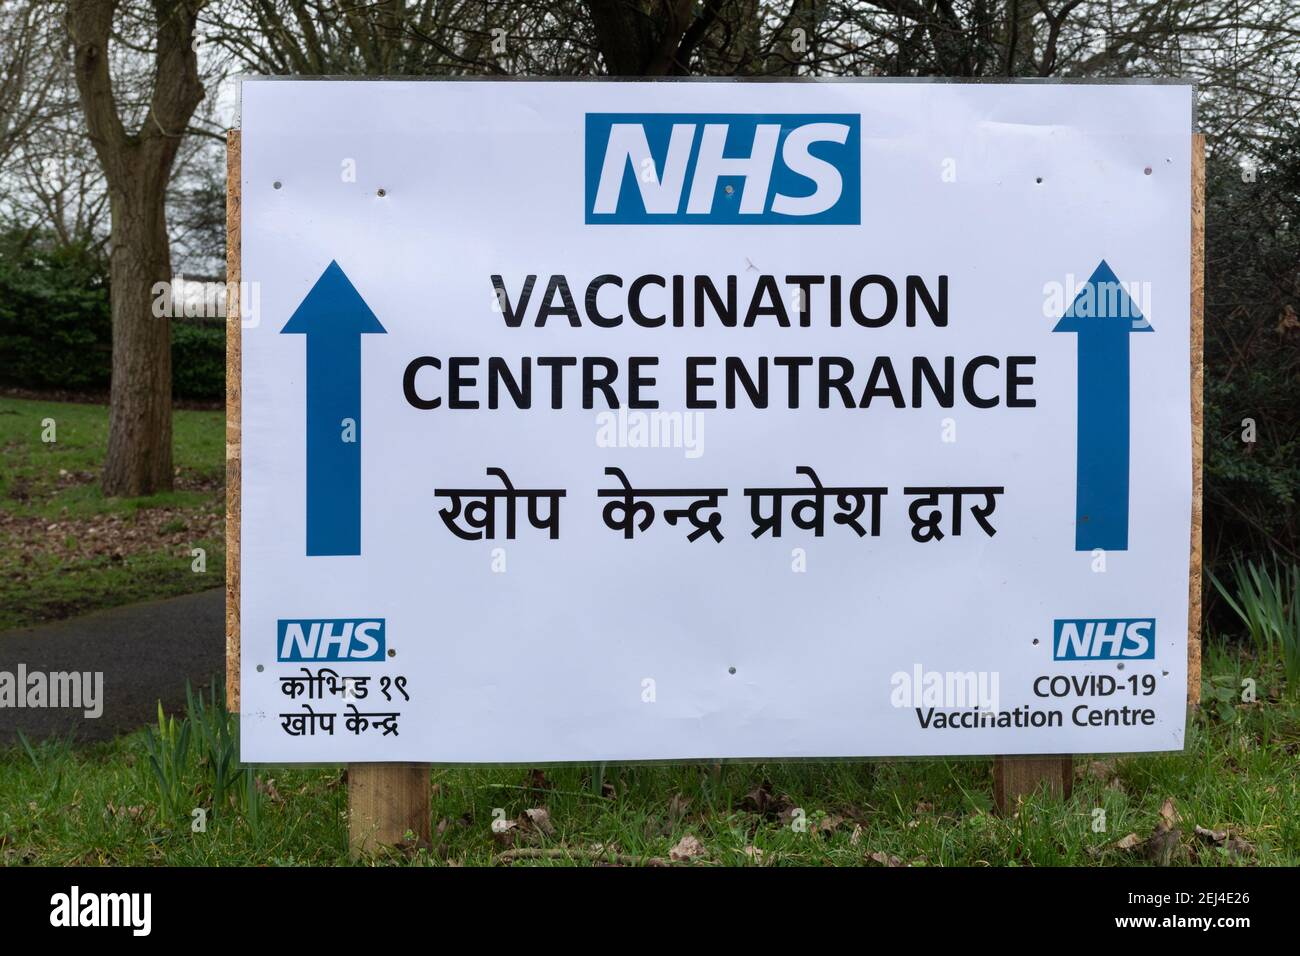 Farnborough, Hampshire, England, UK. February 21st, 2021. The UK coronavirus covid-19 vaccination programme is progressing well in general, but there has been a lower uptake of the vaccine among BAME people including the South Asian community. Pictured is a bilingual sign to a vaccination centre in English and Nepali languages in an area of Hampshire with a large Nepalese community. Stock Photo